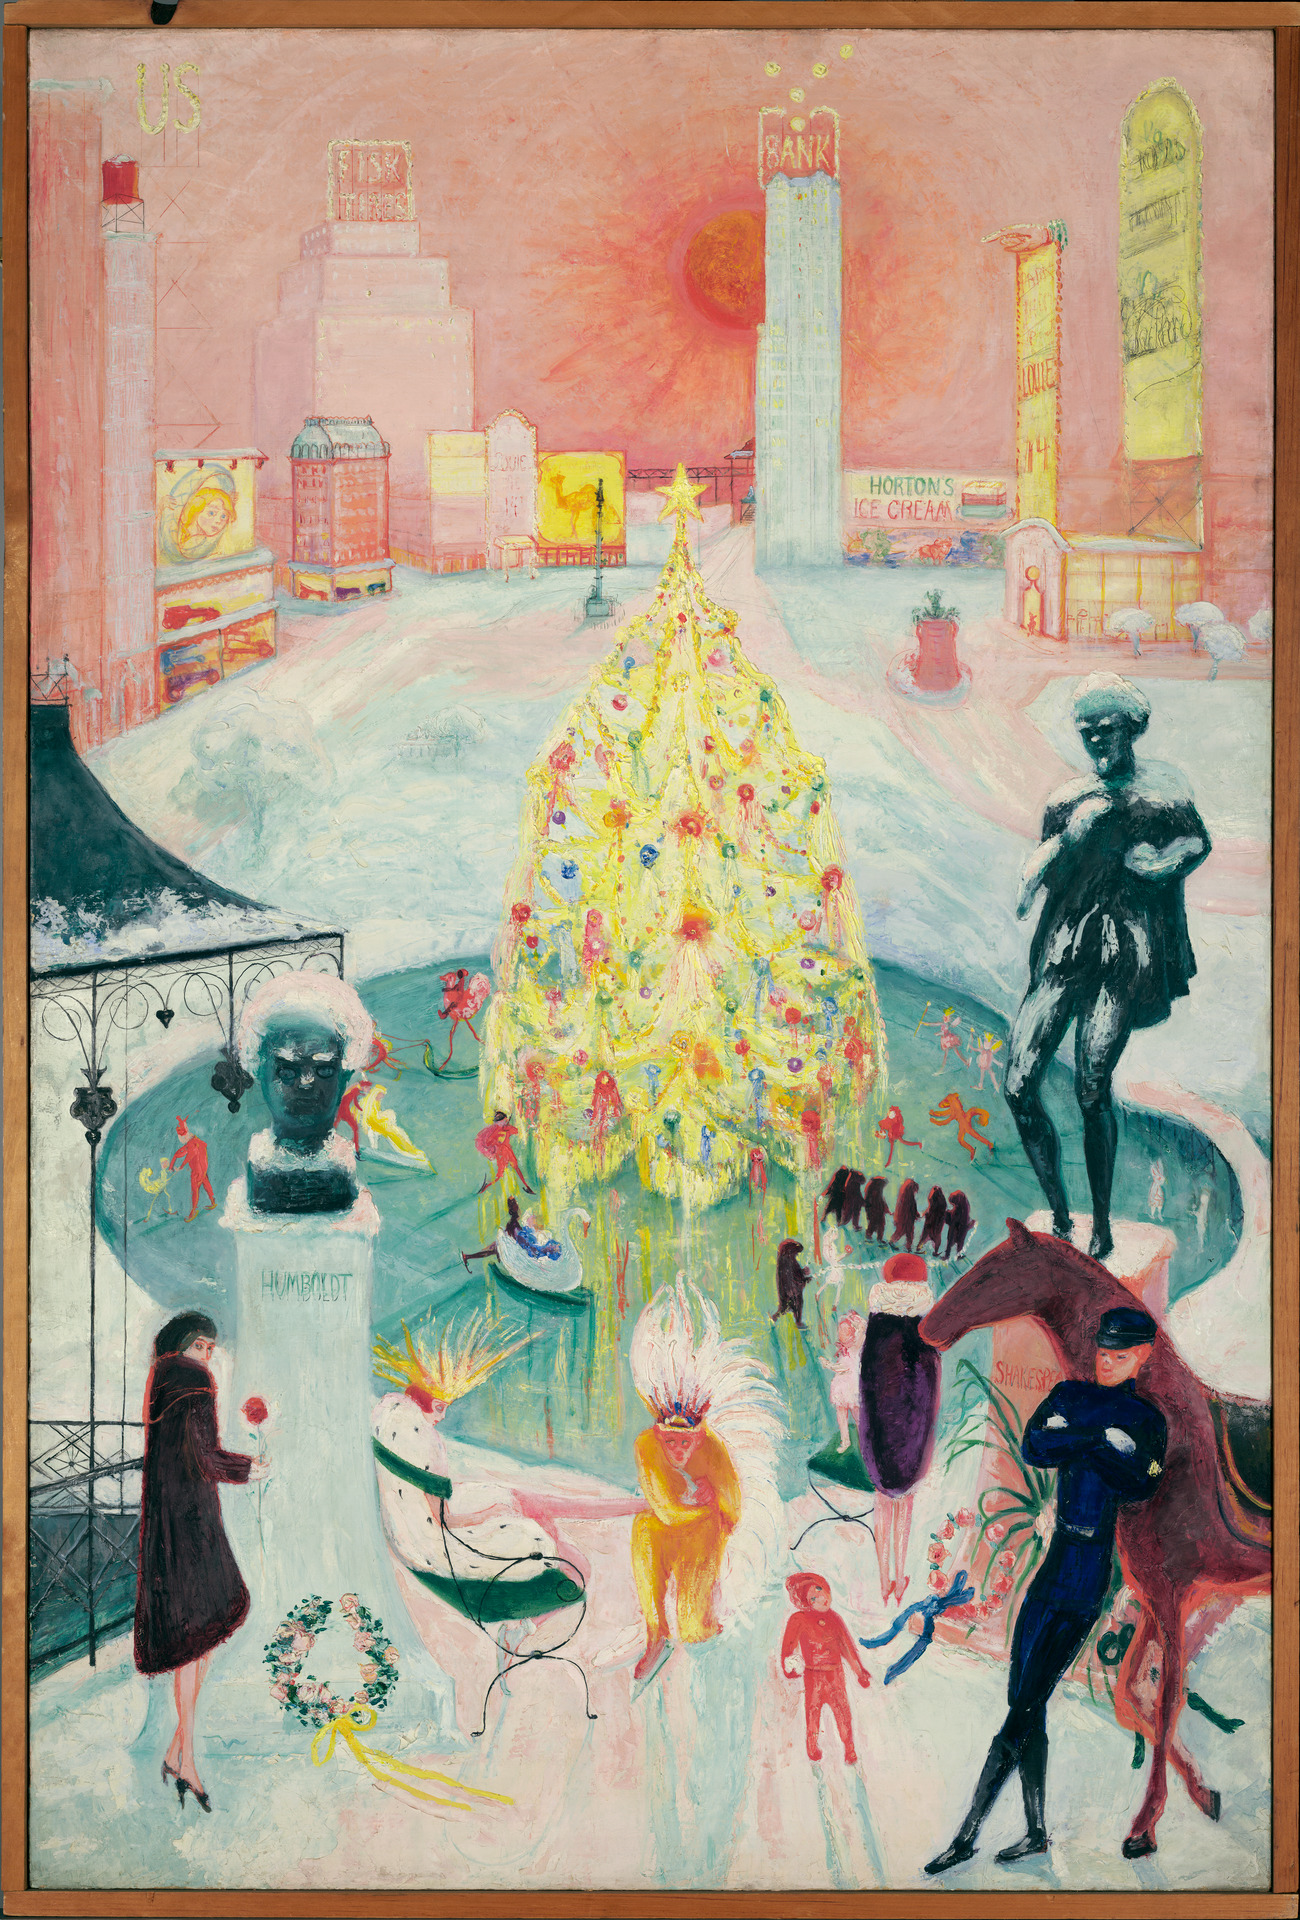 Christmas by Florine Stettheimer - between 1930 and 1940 - 152.6 × 101.6 cm Yale University Art Gallery